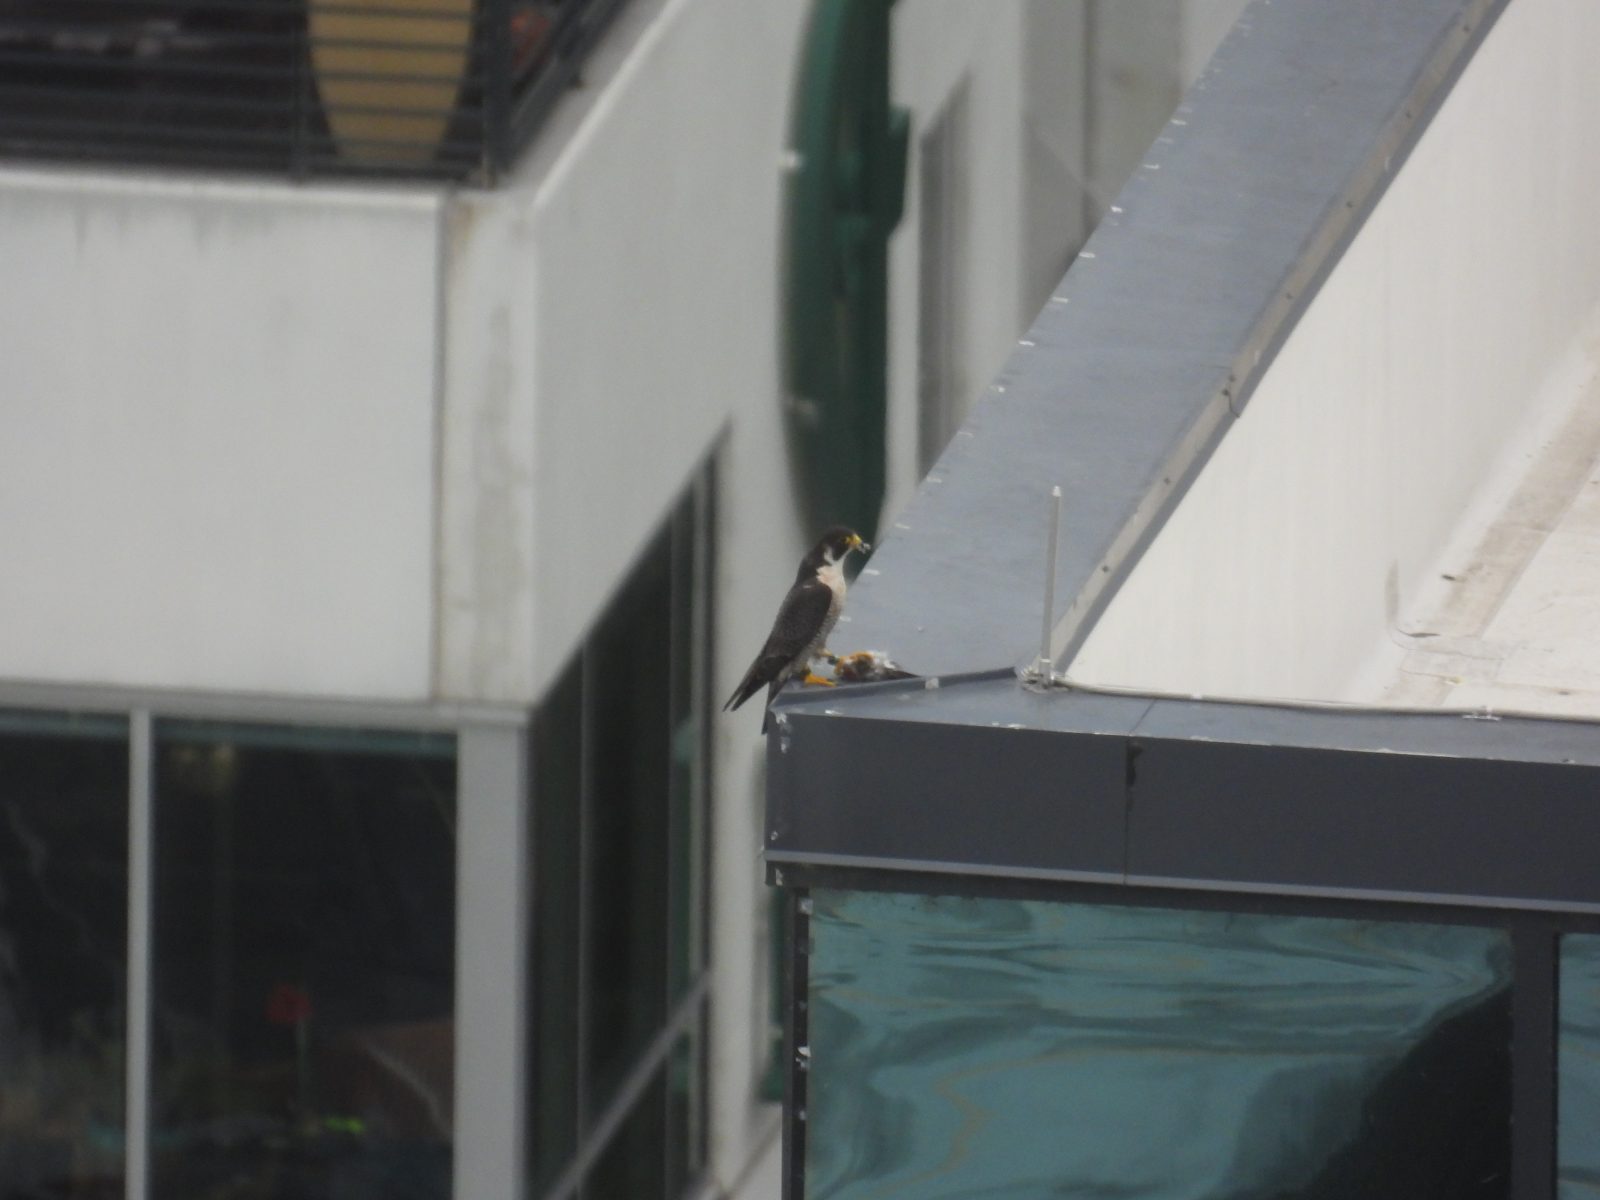 Adult male delivers a prey item to White atop the roof of the William Mullen's building.